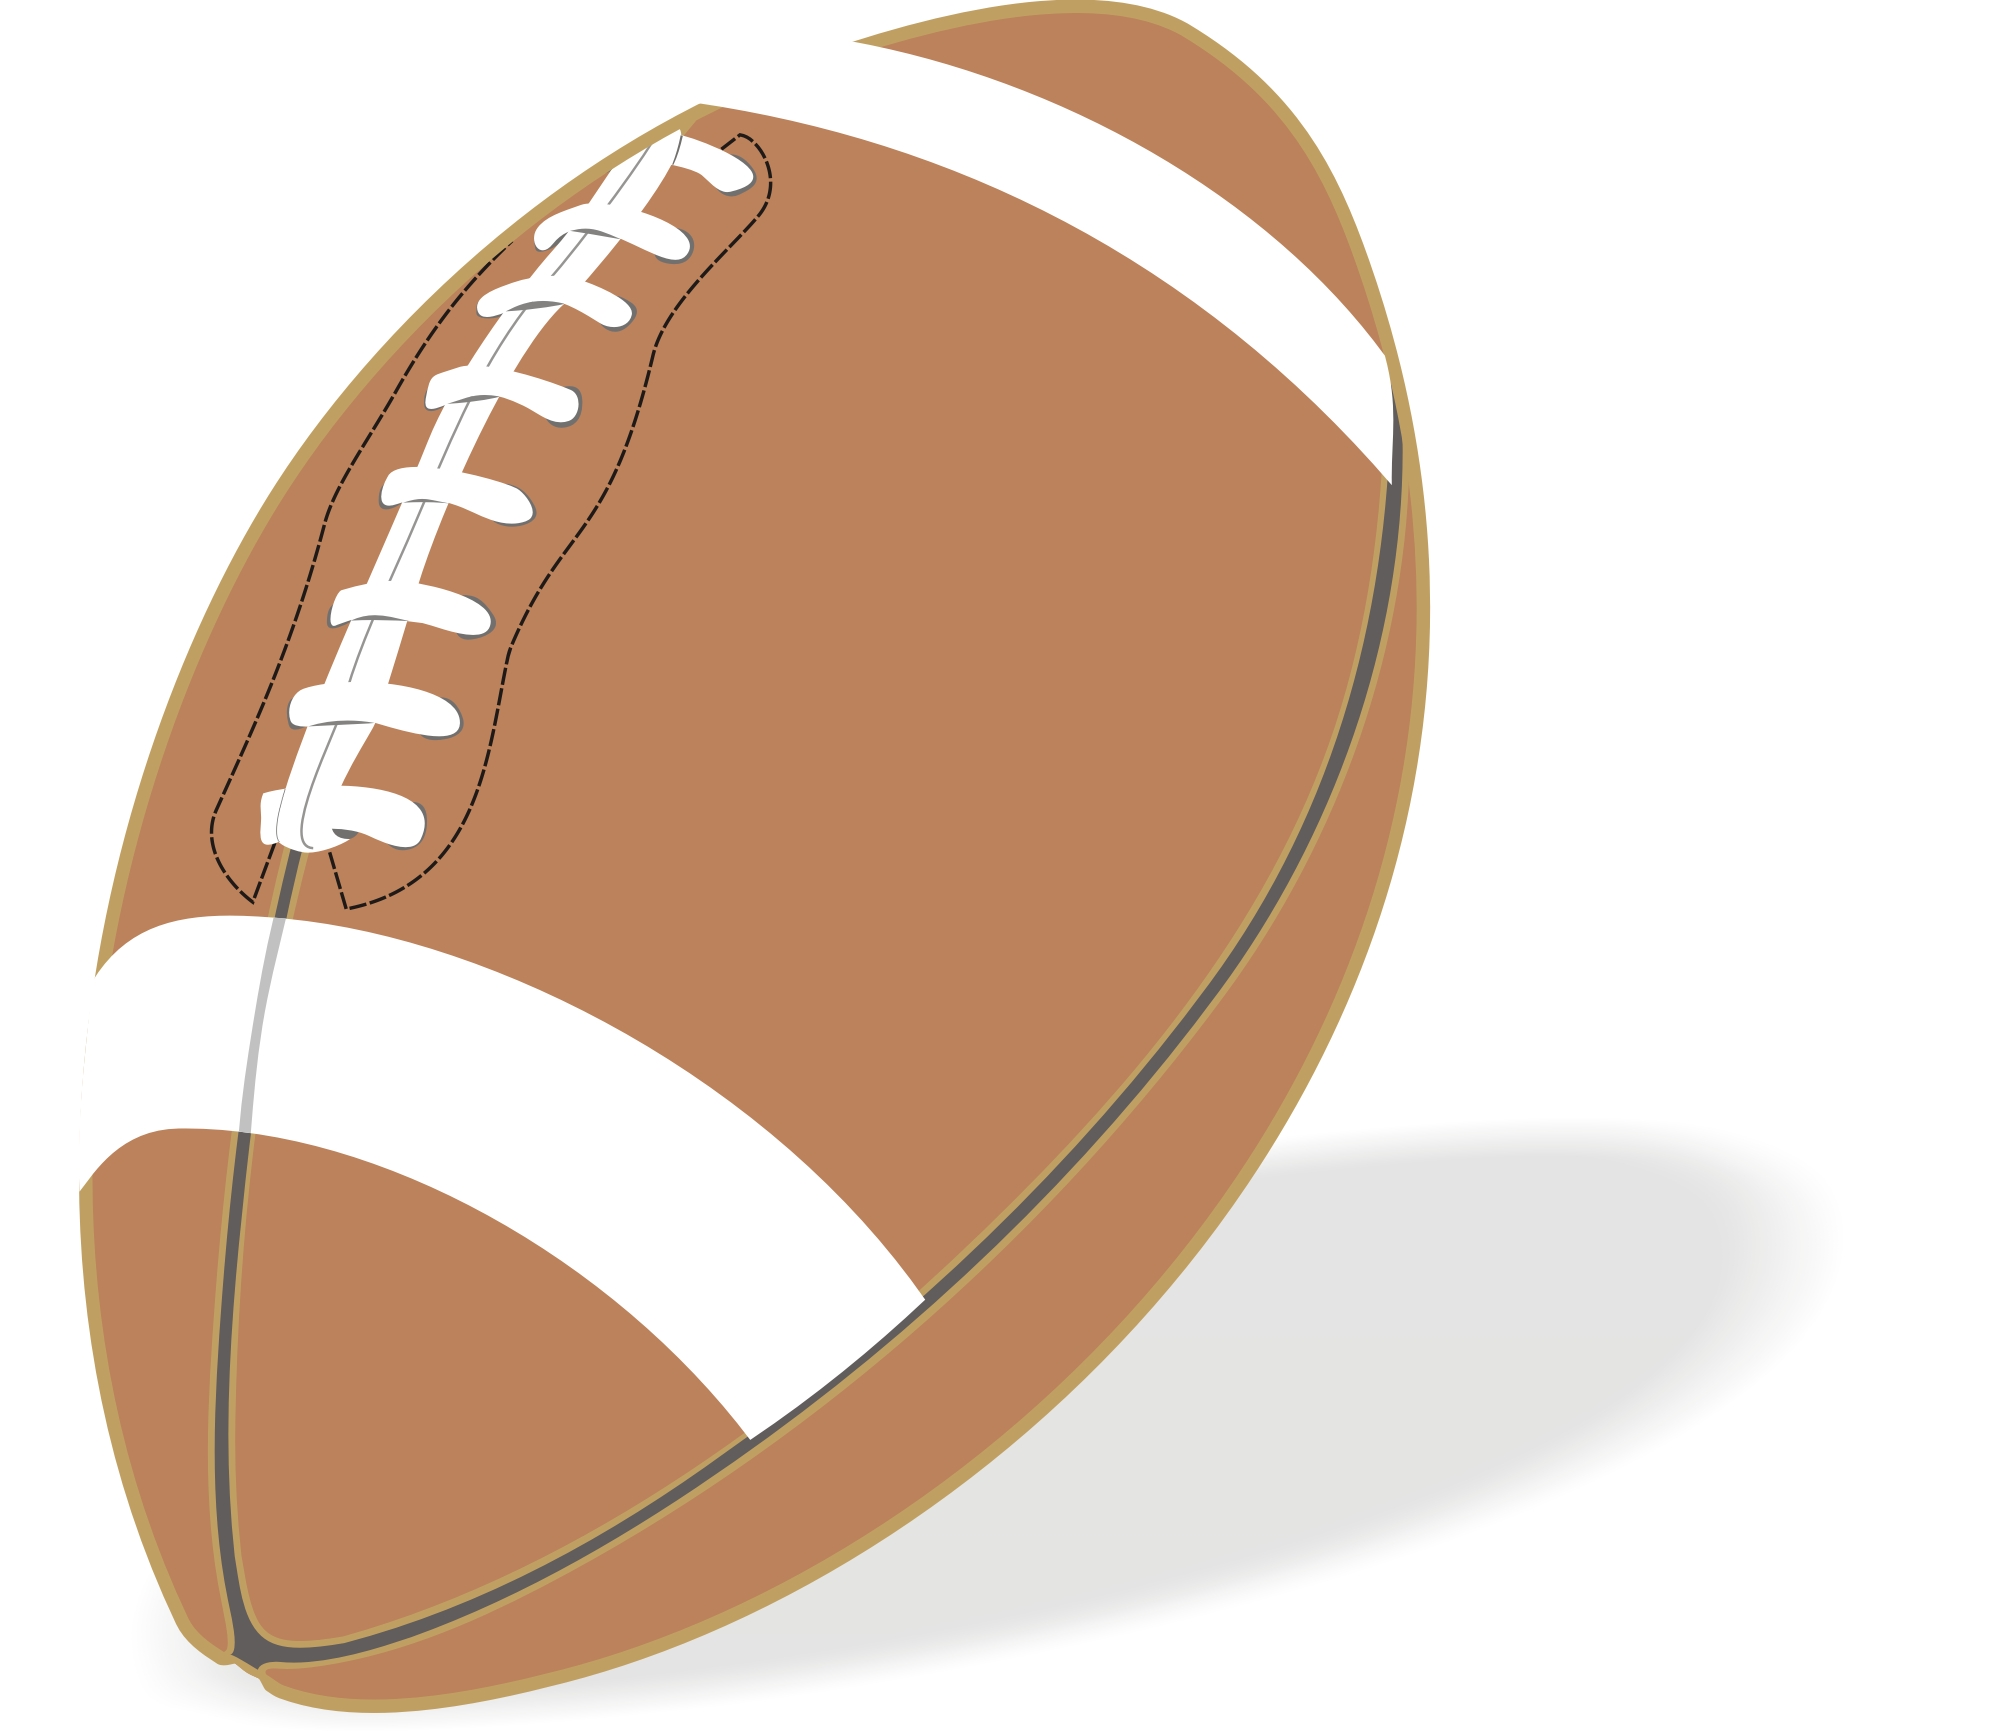 football clipart download - photo #20